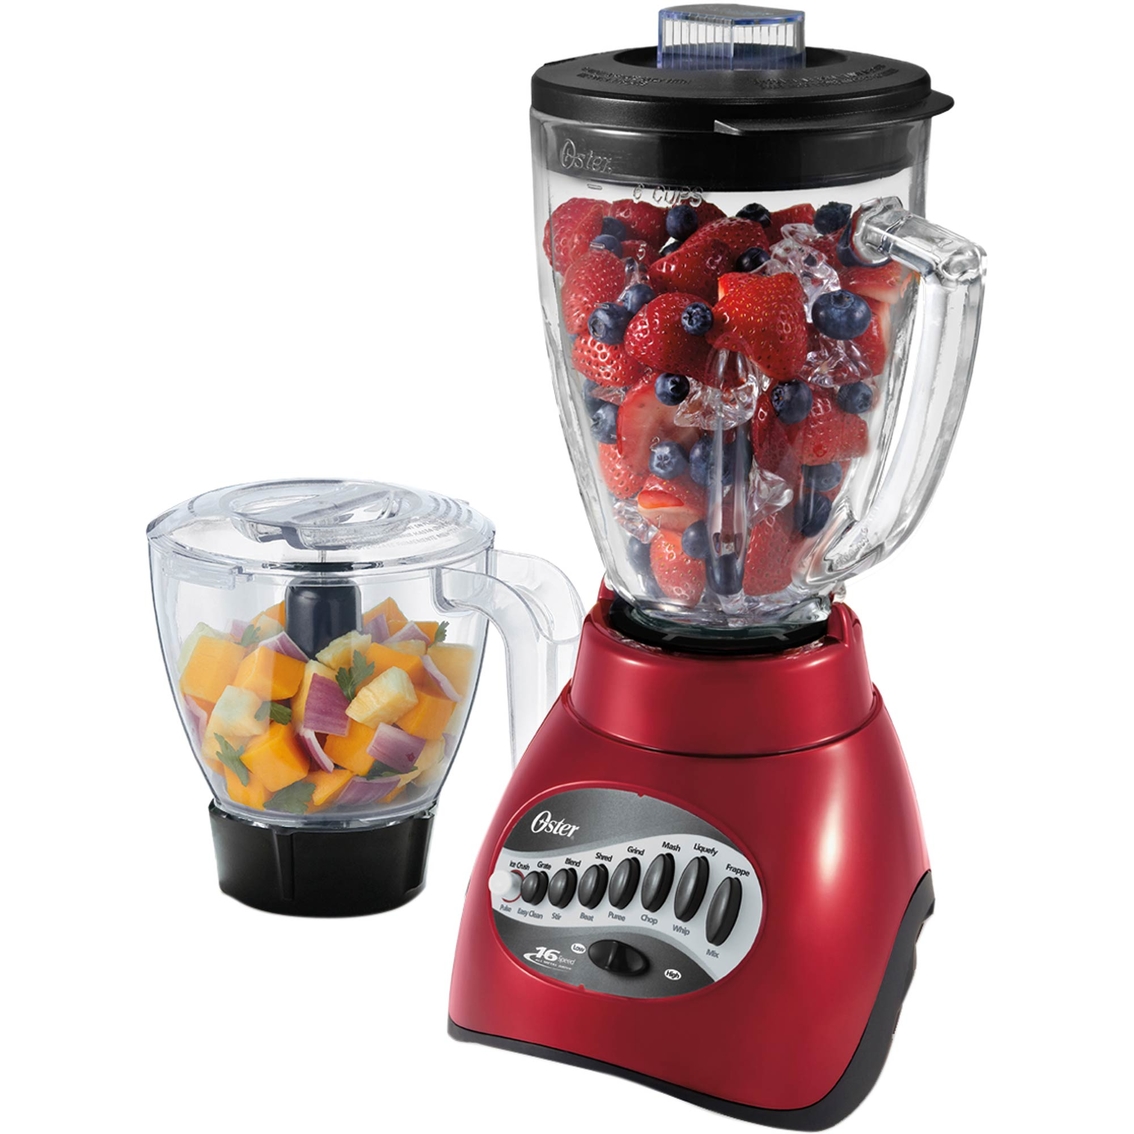 Oster Easy Clean Blender with Glass Jar